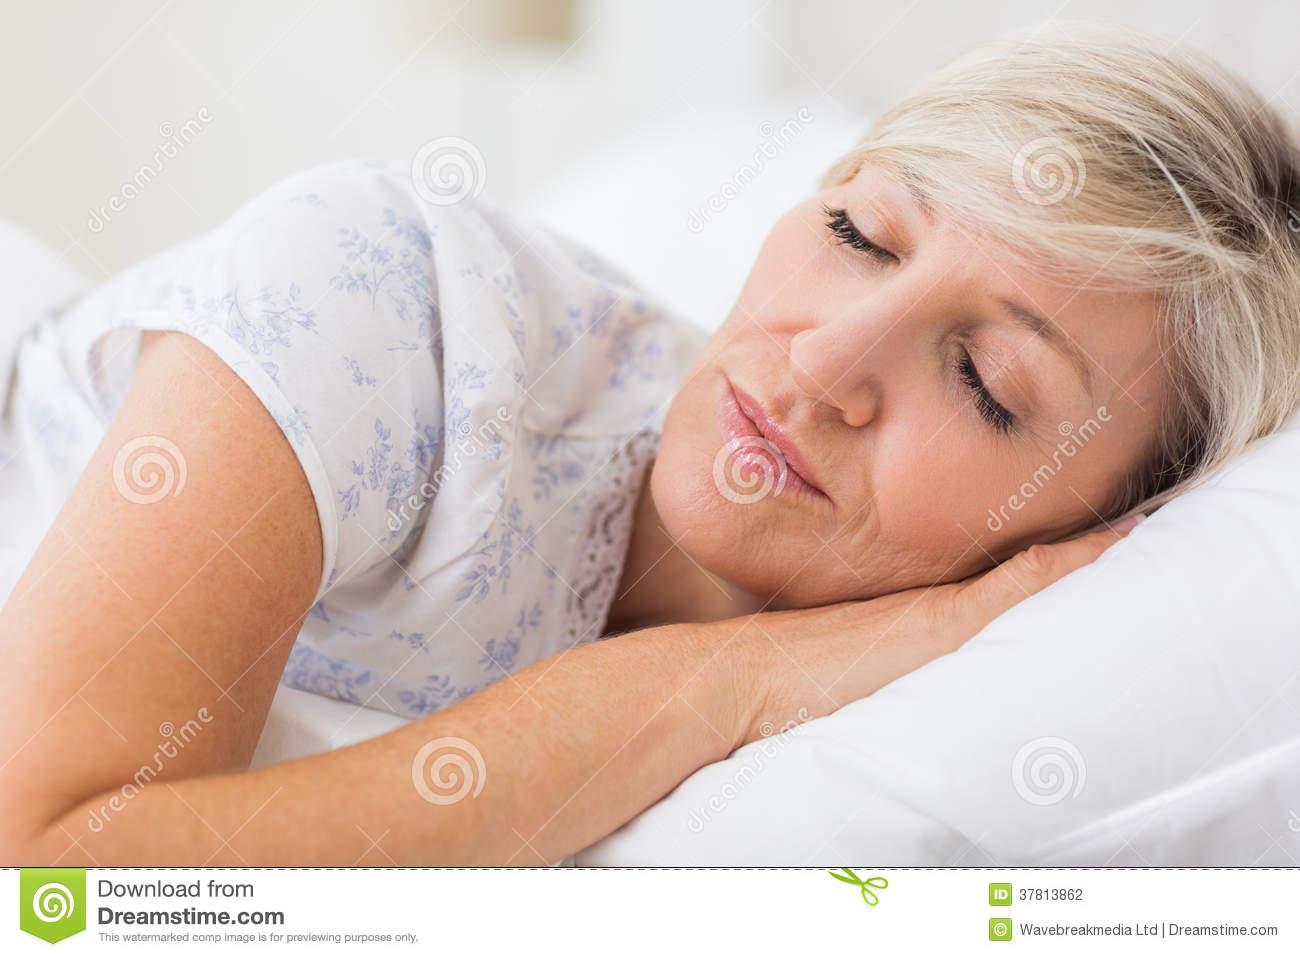 Woman Sleeping With Eyes Closed In Bed Stock Photography   Image